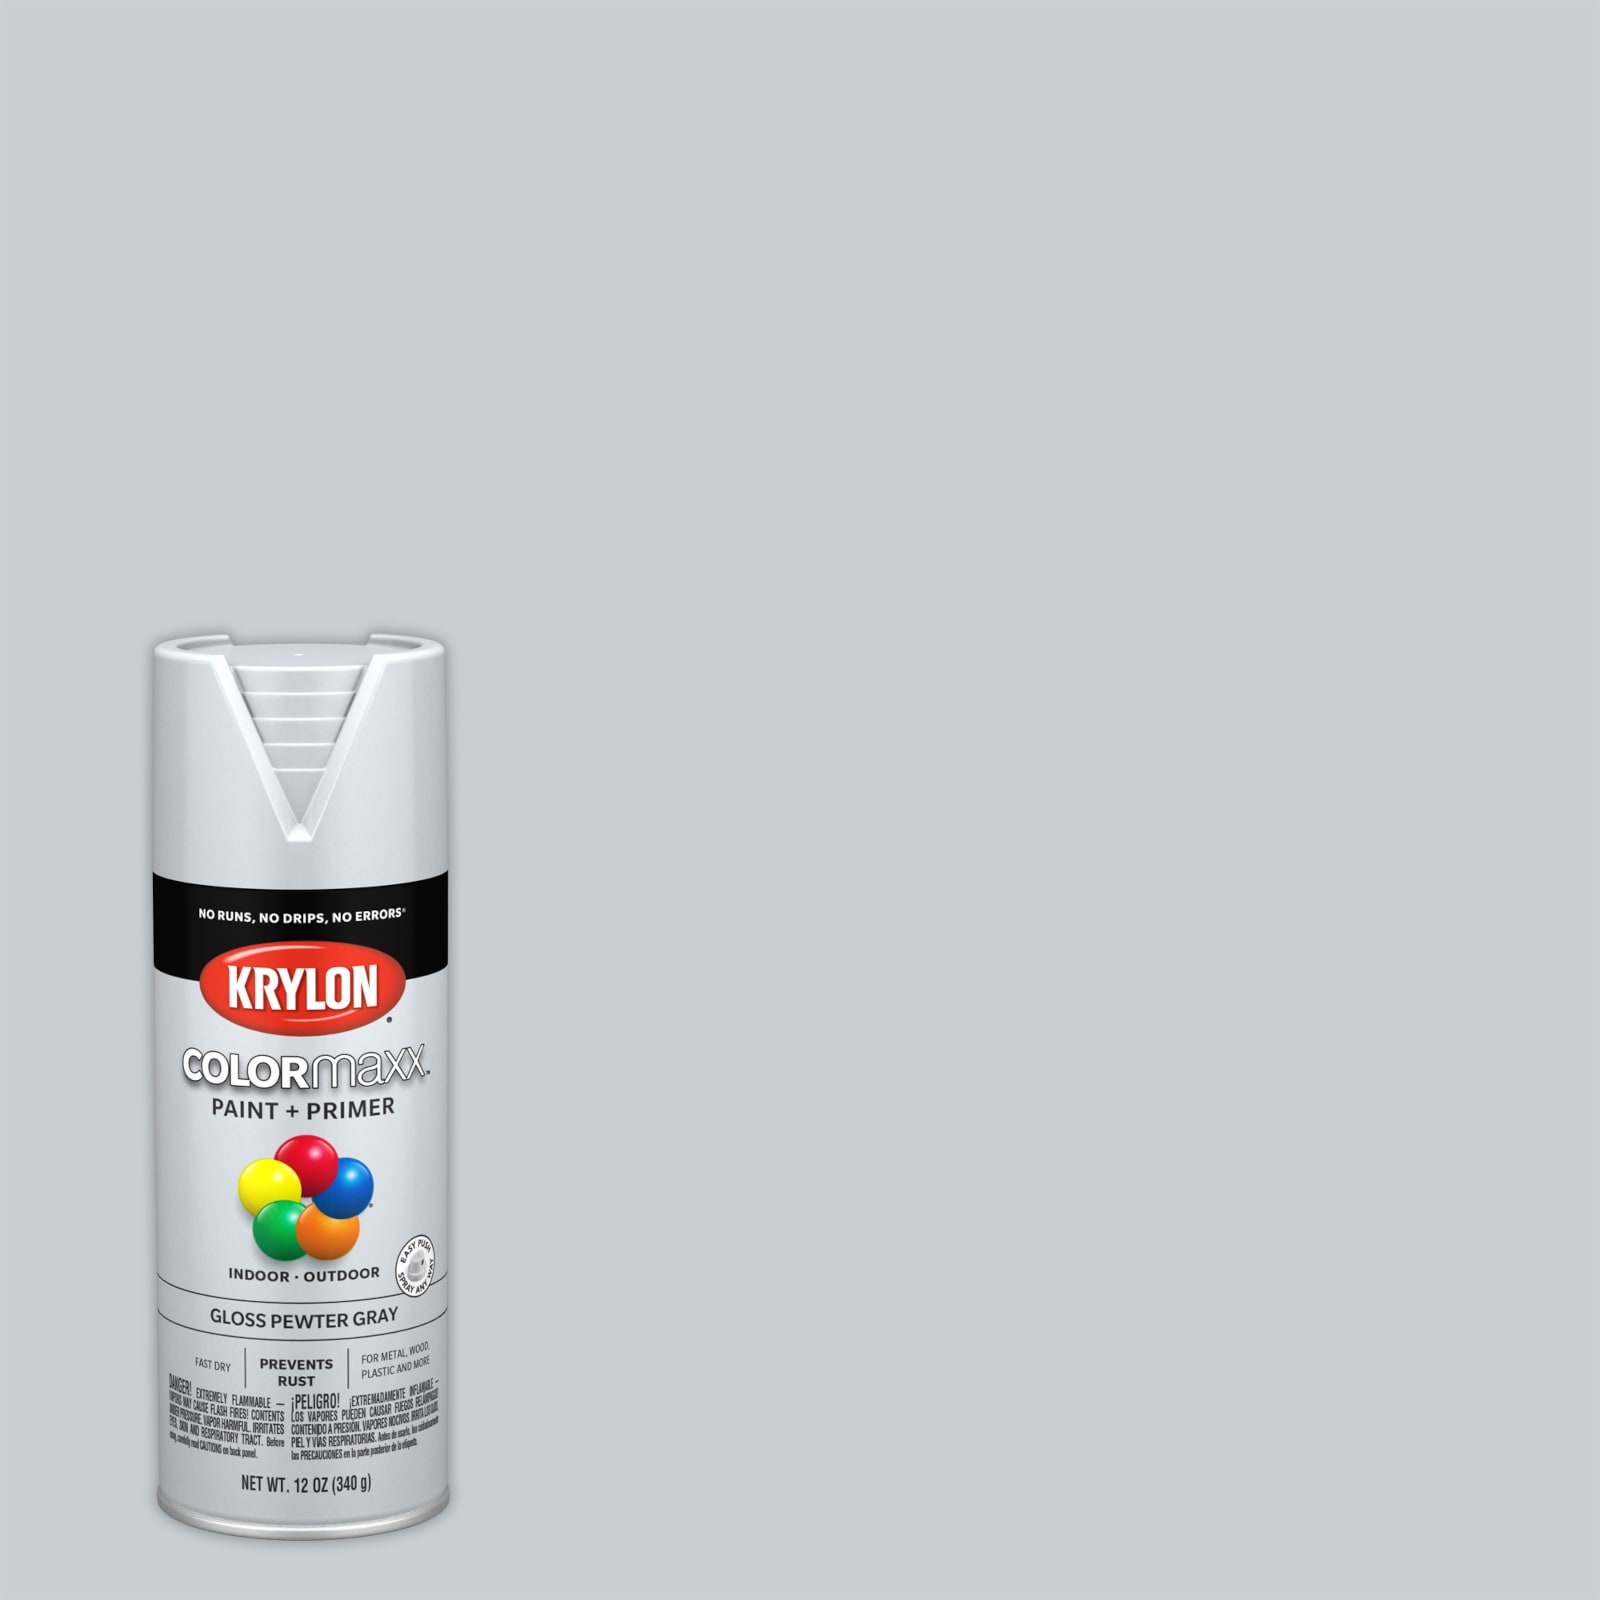 Krylon COLORmaxx Matte Sand Dollar Spray Paint and Primer In One (NET WT.  12-oz) in the Spray Paint department at